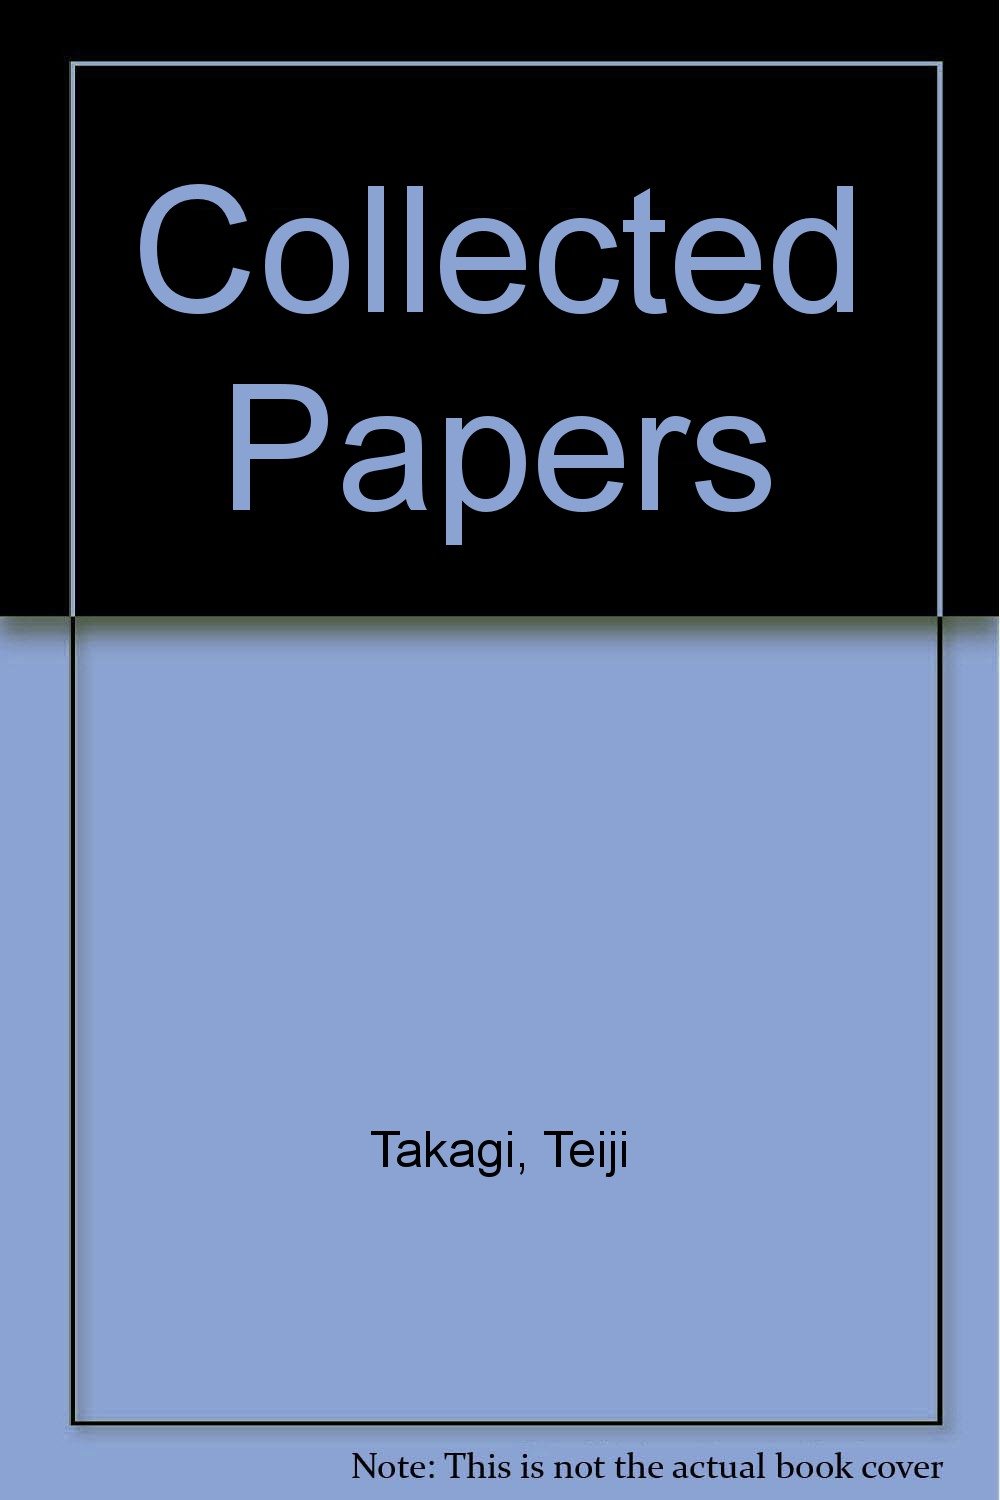 Collected papers magazine reviews